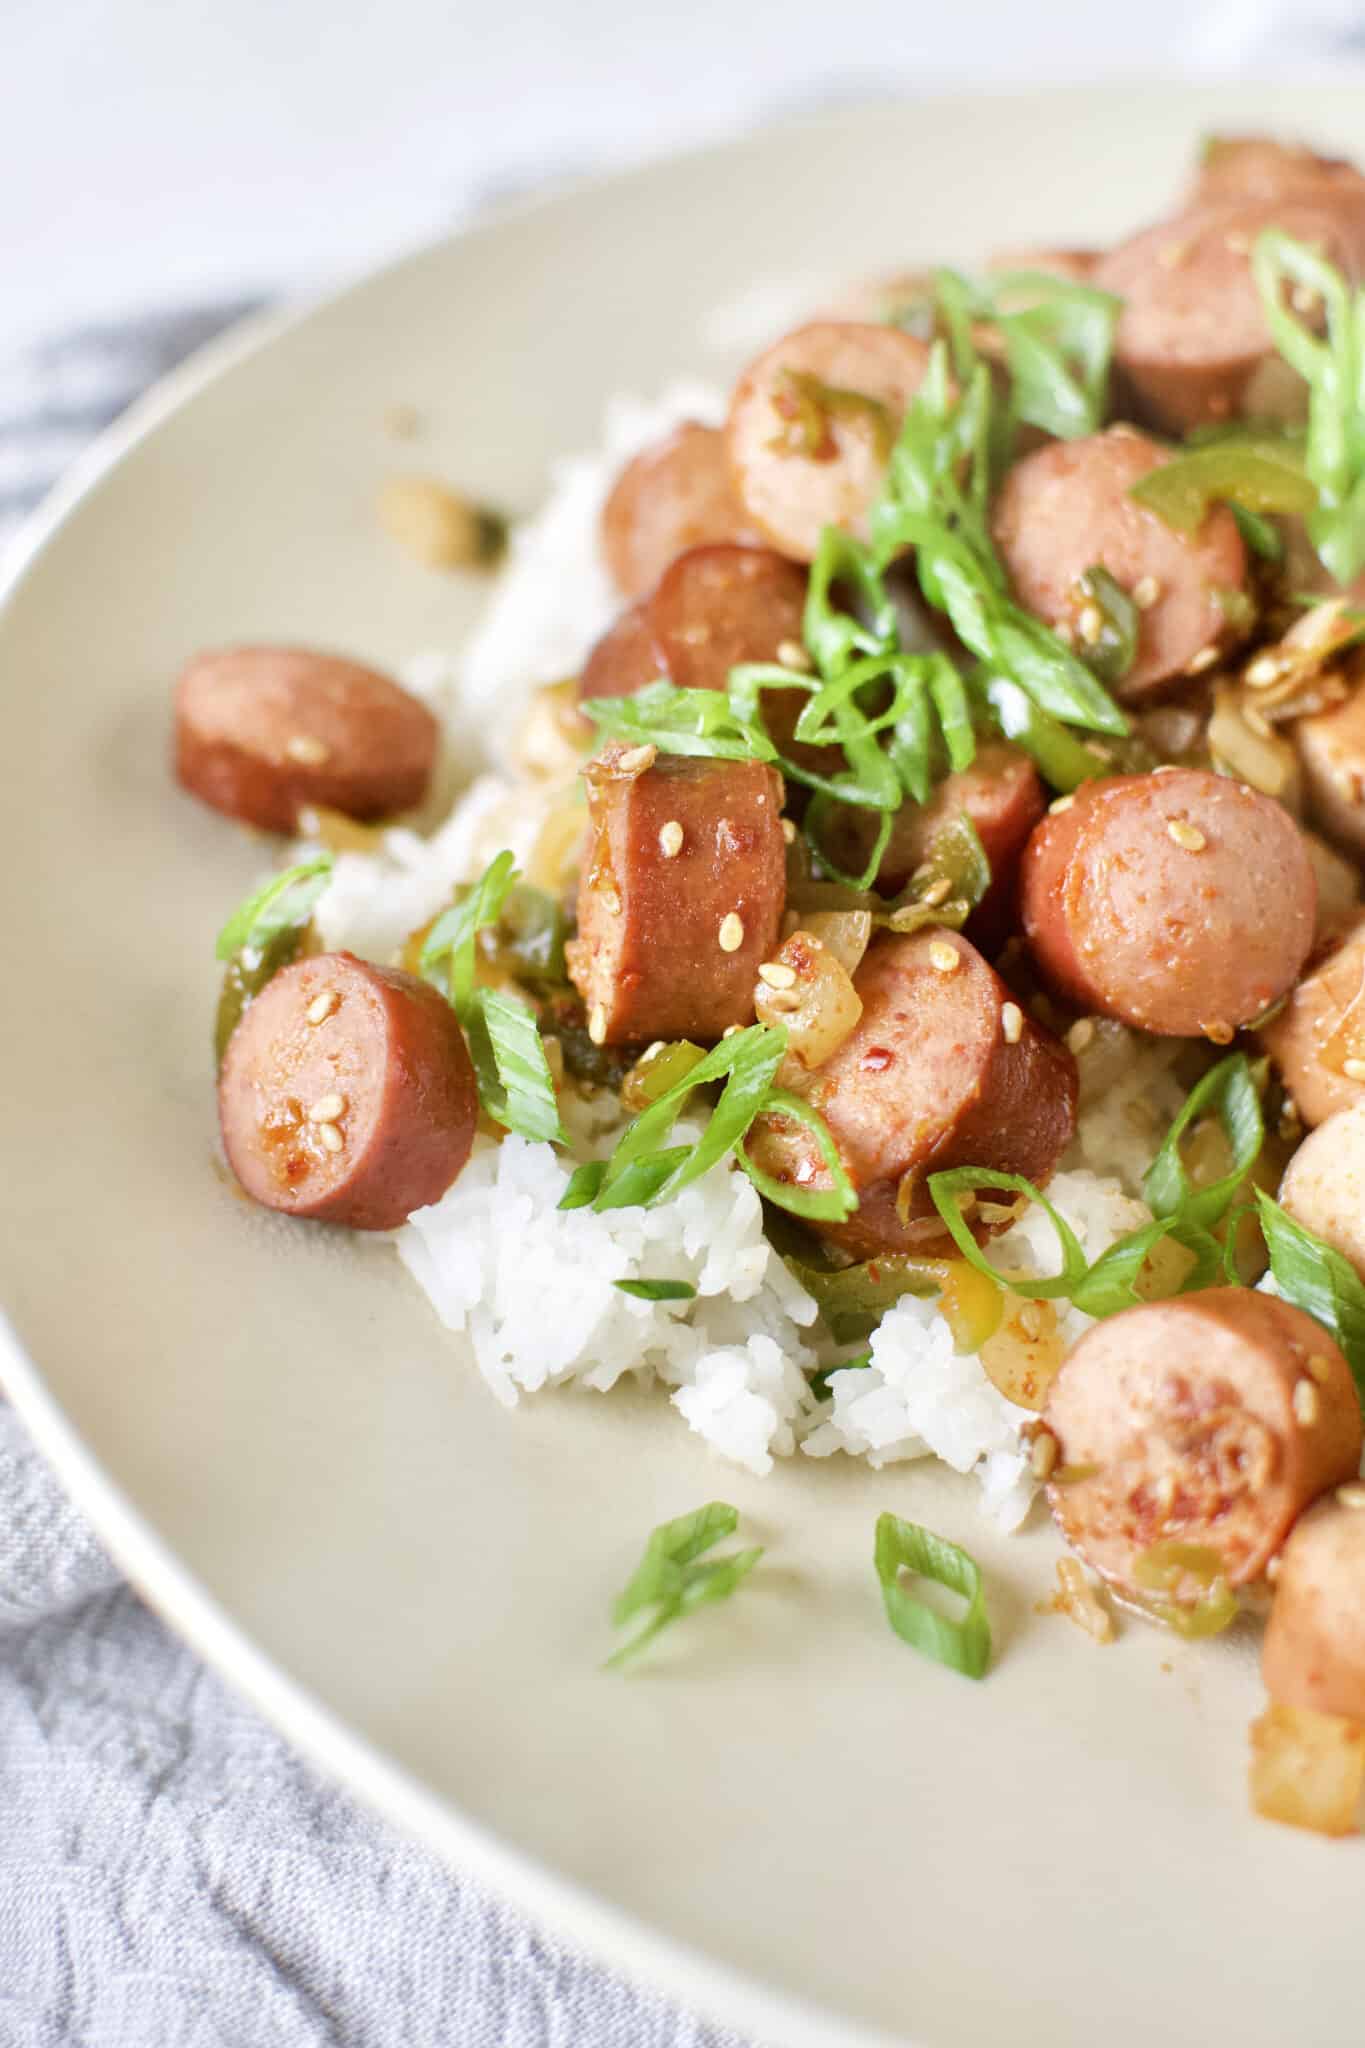 Joanna Gaines Hot Dogs and Rice prepared by KendellKreations.com